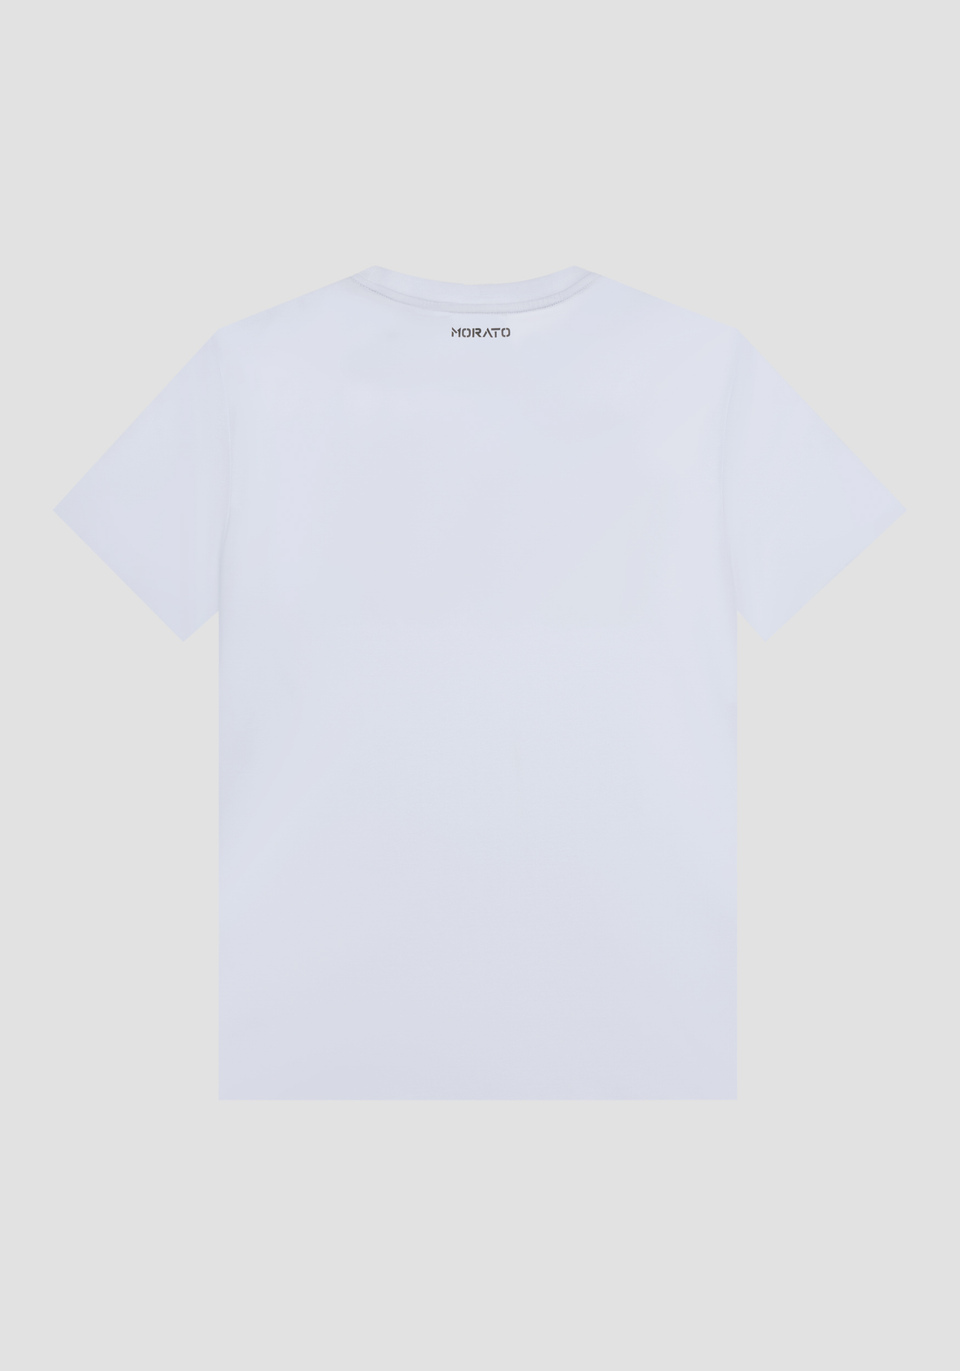 REGULAR FIT T-SHIRT IN 100% COTTON WITH CONTRAST PRINT - Antony Morato Online Shop